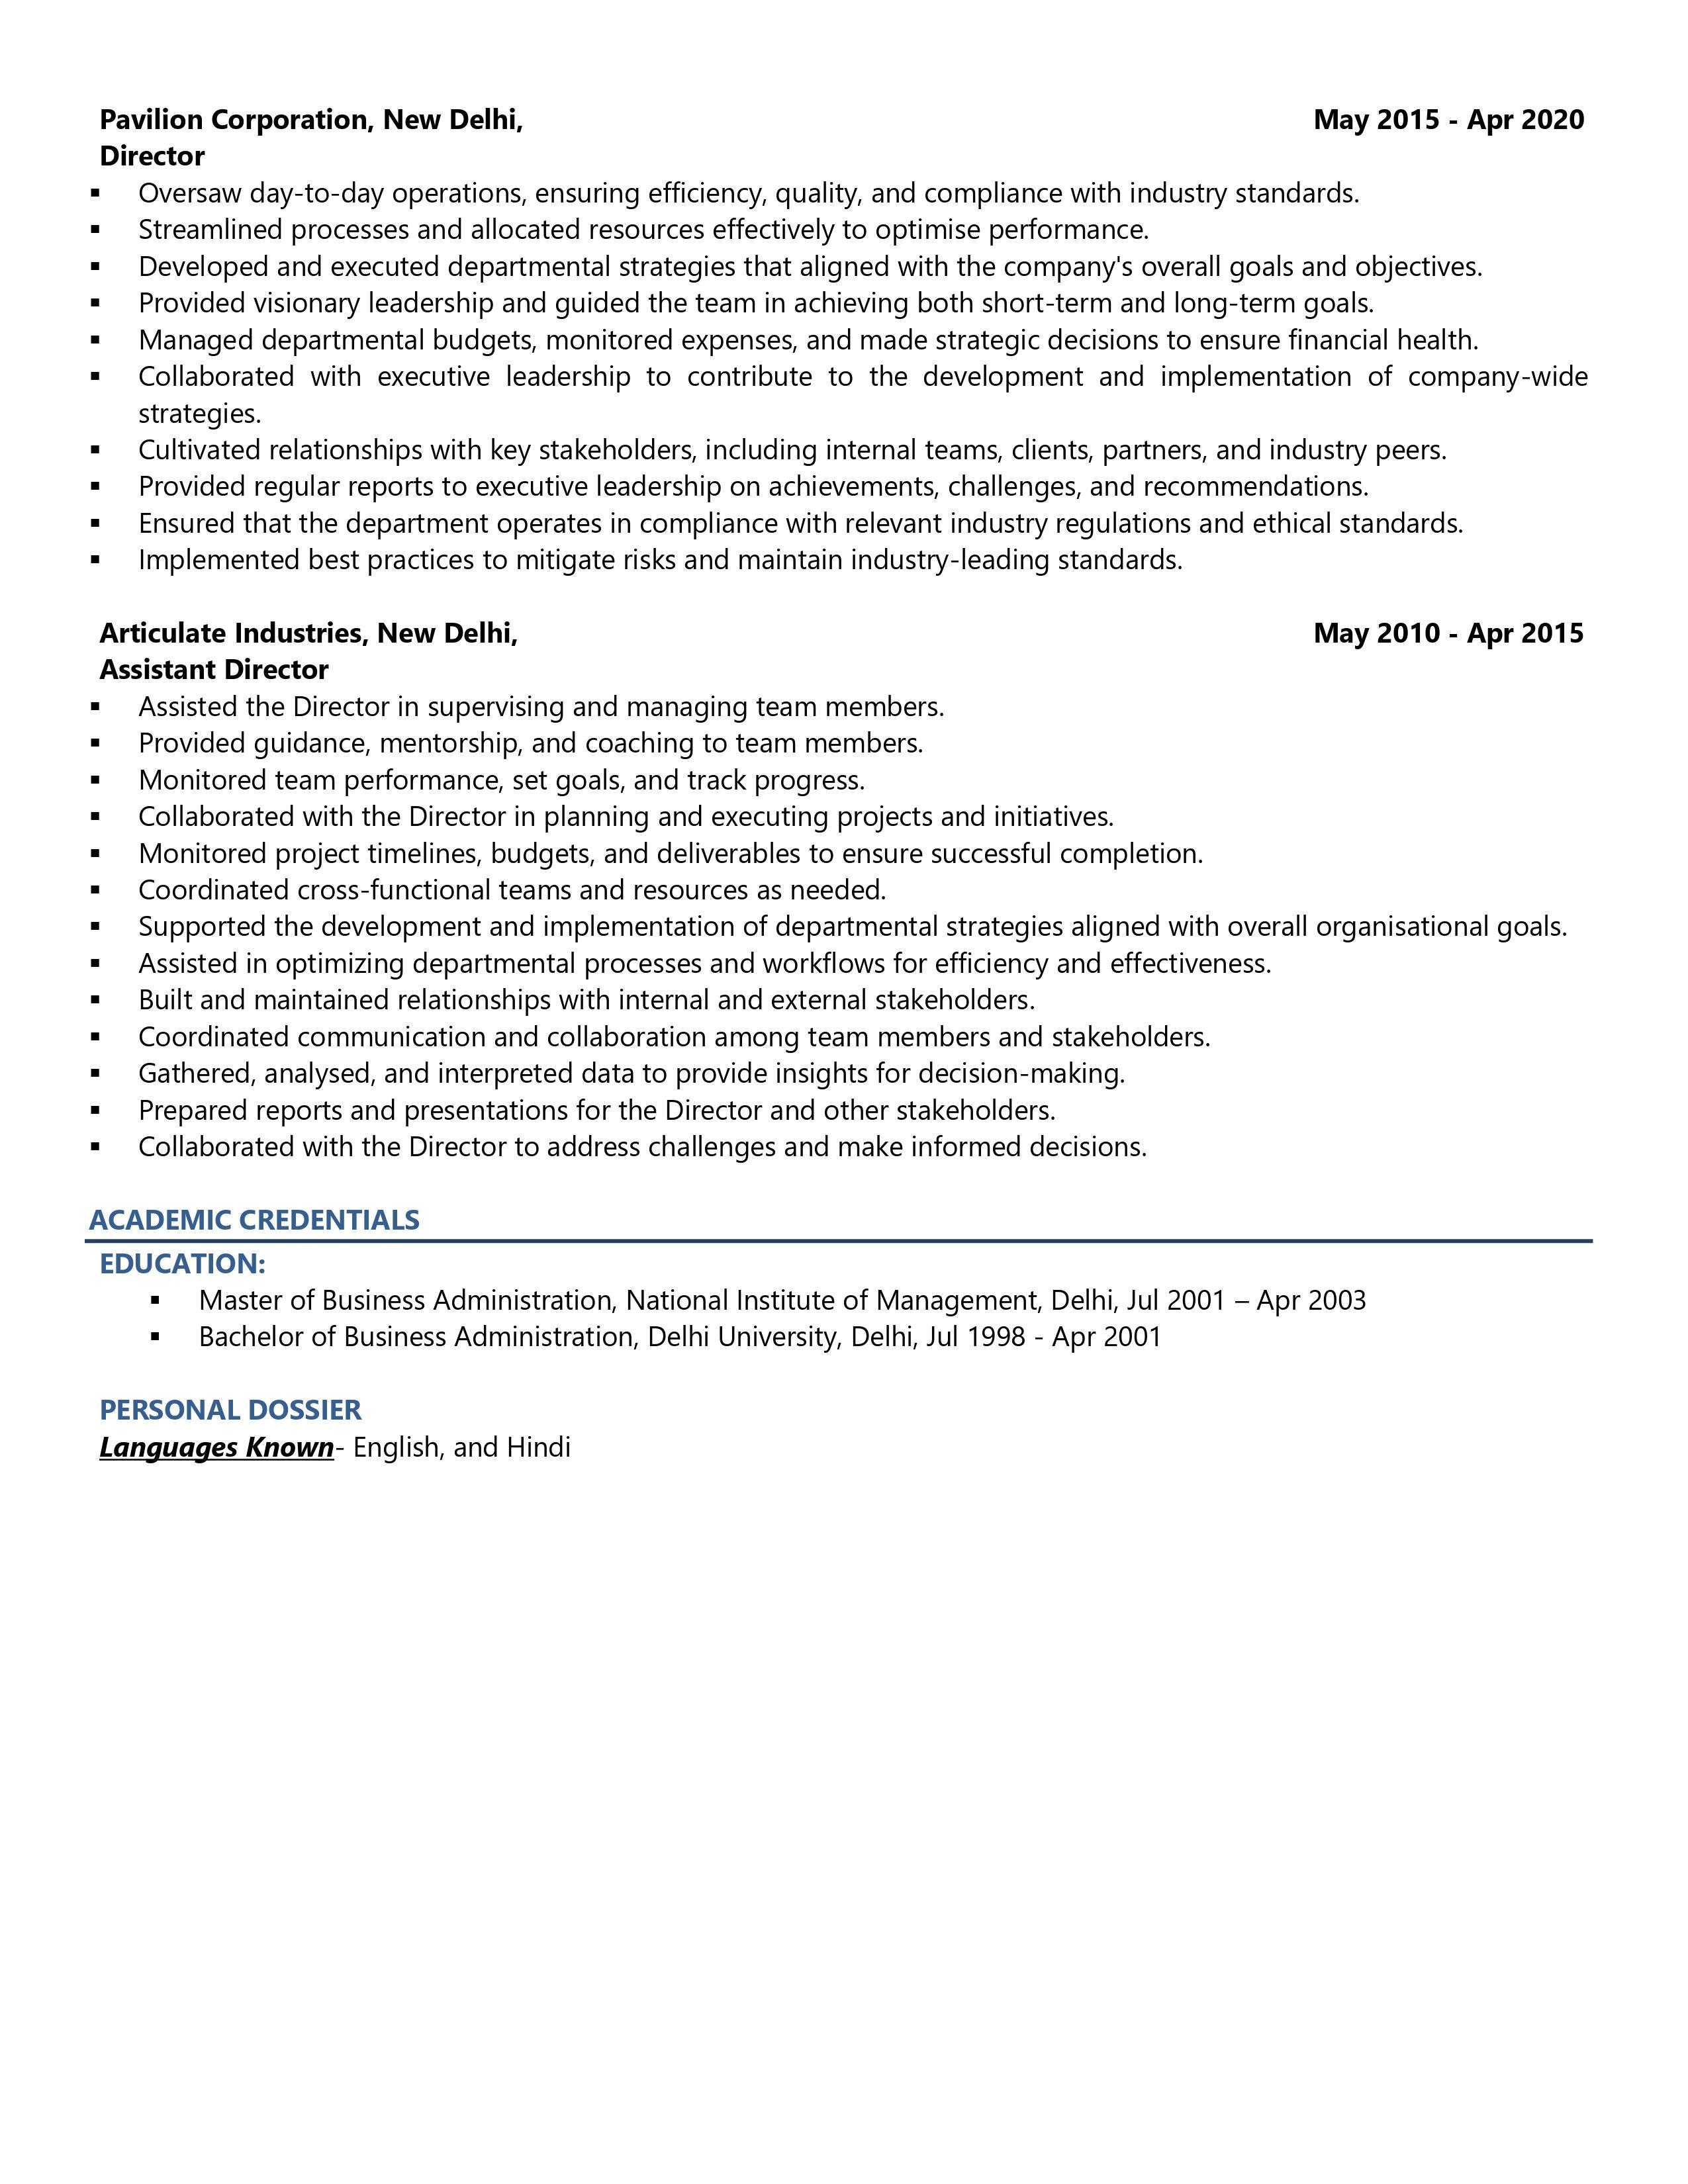 Group Vice President - Resume Example & Template